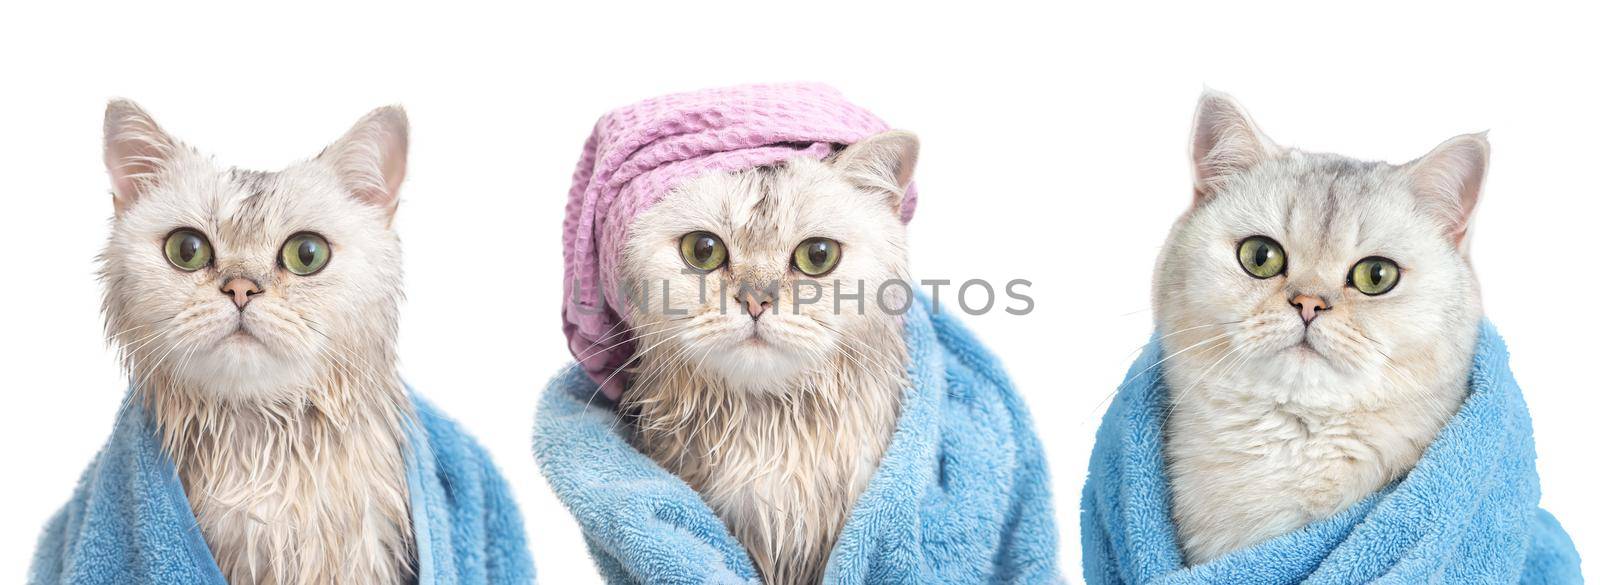 A wide banner of three funny wet white British cats: after bathing, wrapped in a blue towel, in a purple towel on his head and a dry cat in a blue towel, isolated on white background. Close up